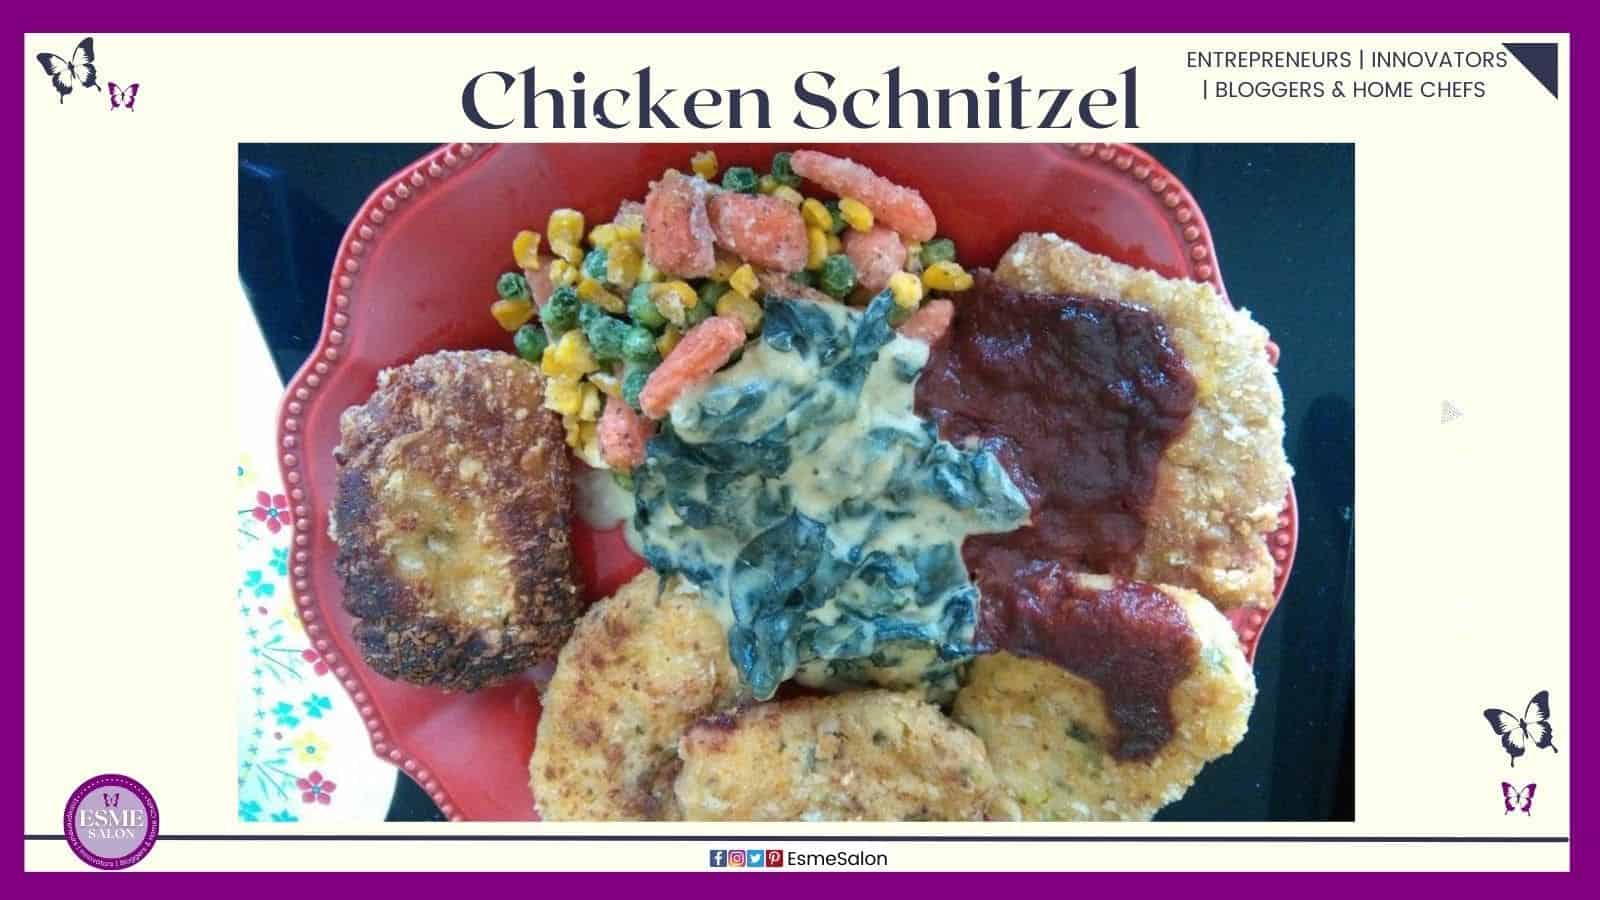 an image of a red plate filled with Chicken Schnitzel with Cheesy Potato Patties, Creamed Spinach And Mixed Frozen Veggies